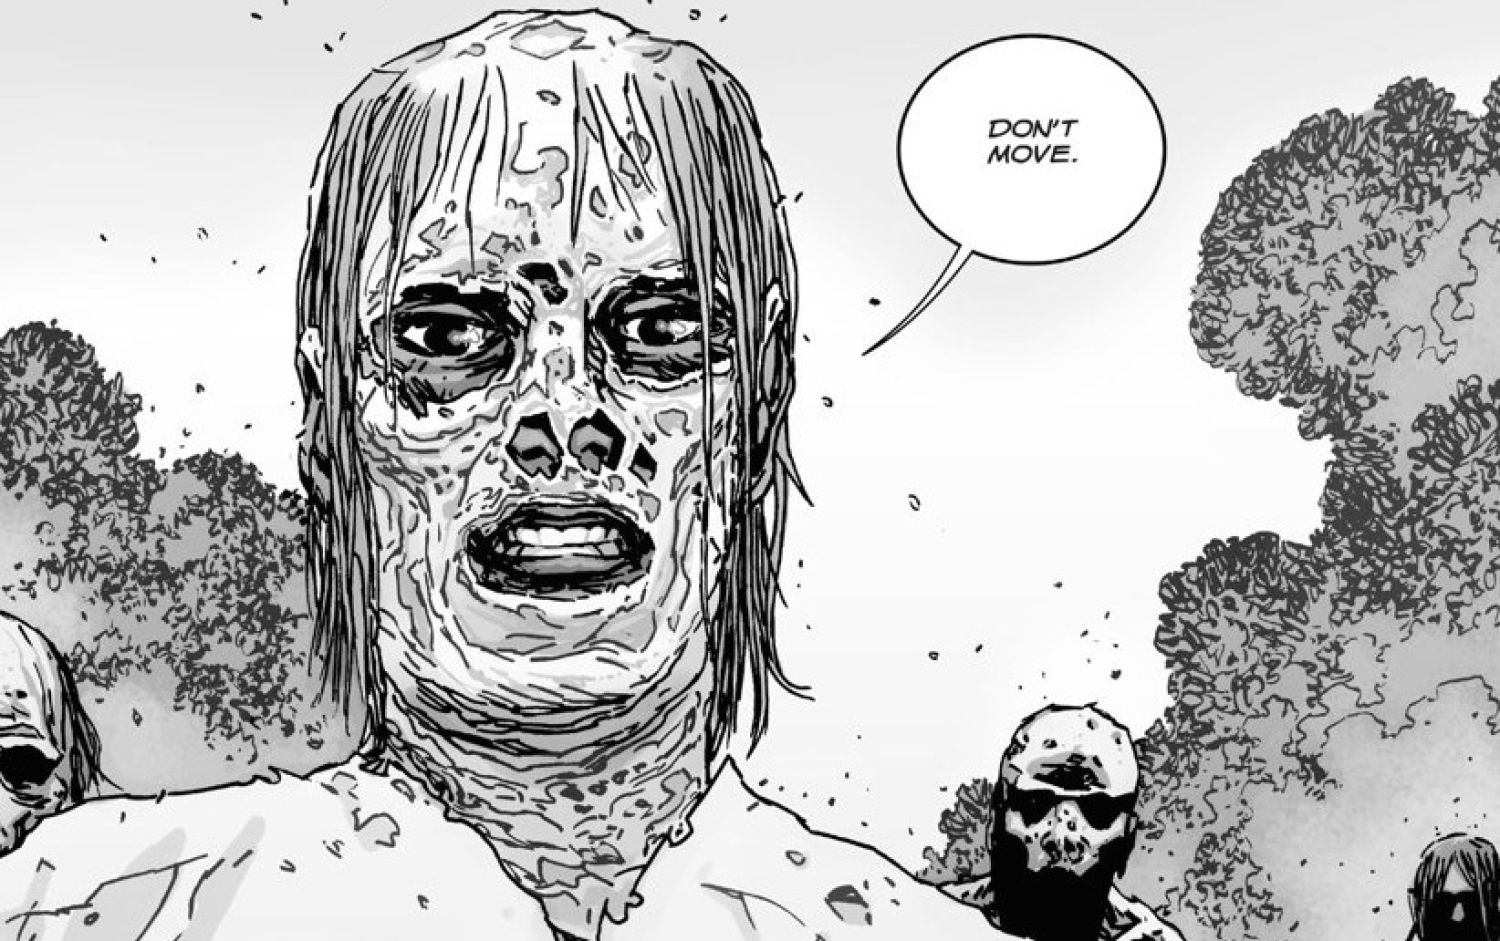 Alpha, a member of the Whisperers in The Walking Dead comics